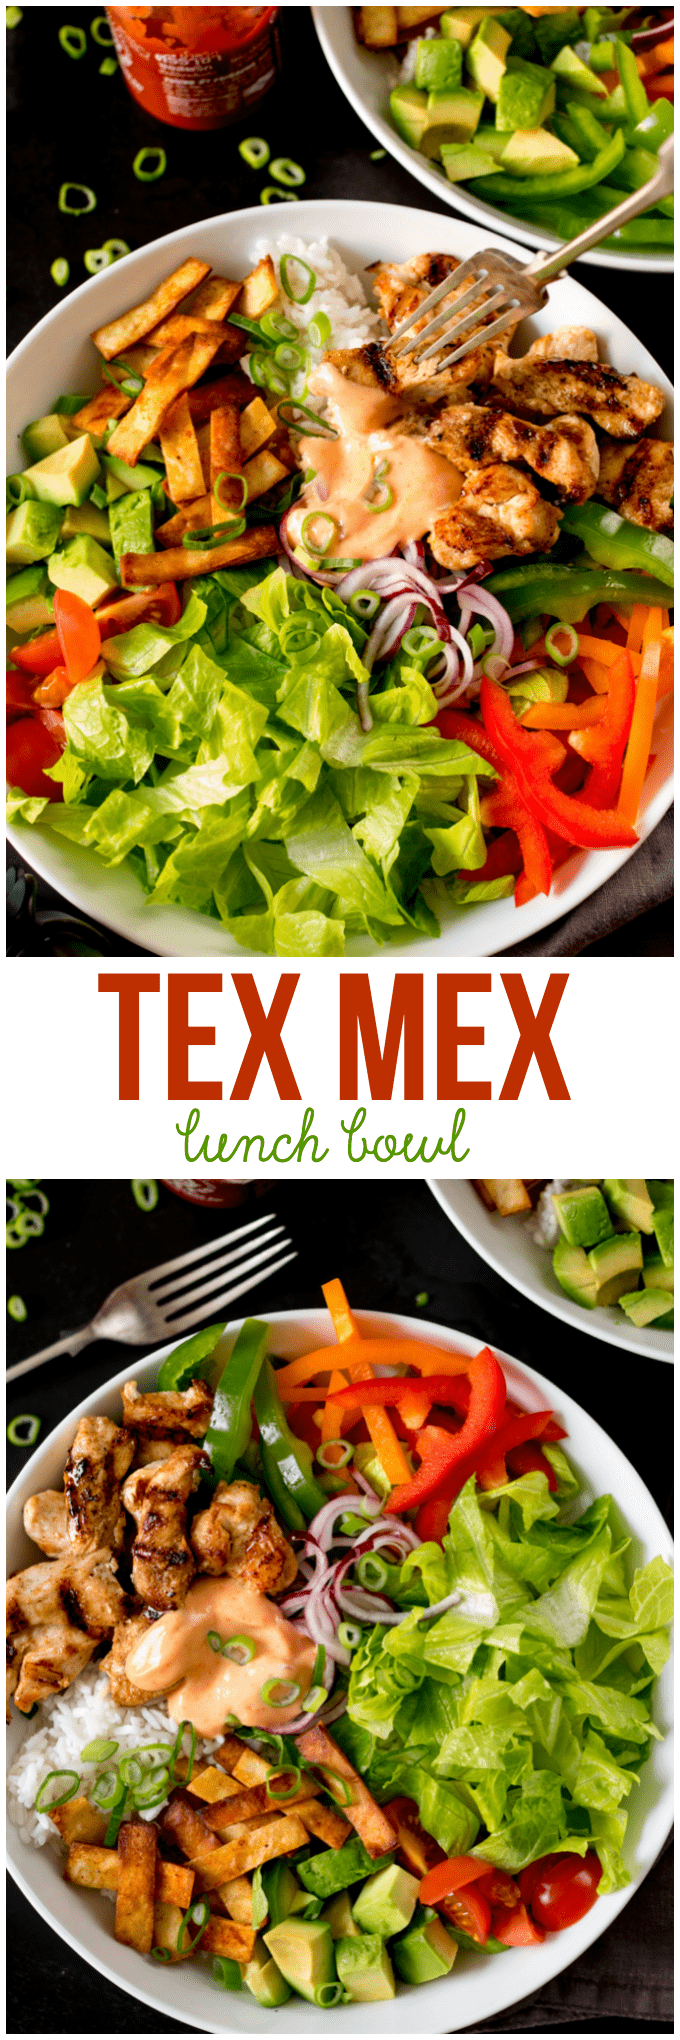 Tex Mex Lunch Bowl Recipe - A great, simple meal prep! Put your favorite burrito toppings over rice with this juicy, marinaded chicken and creamy chili sauce.